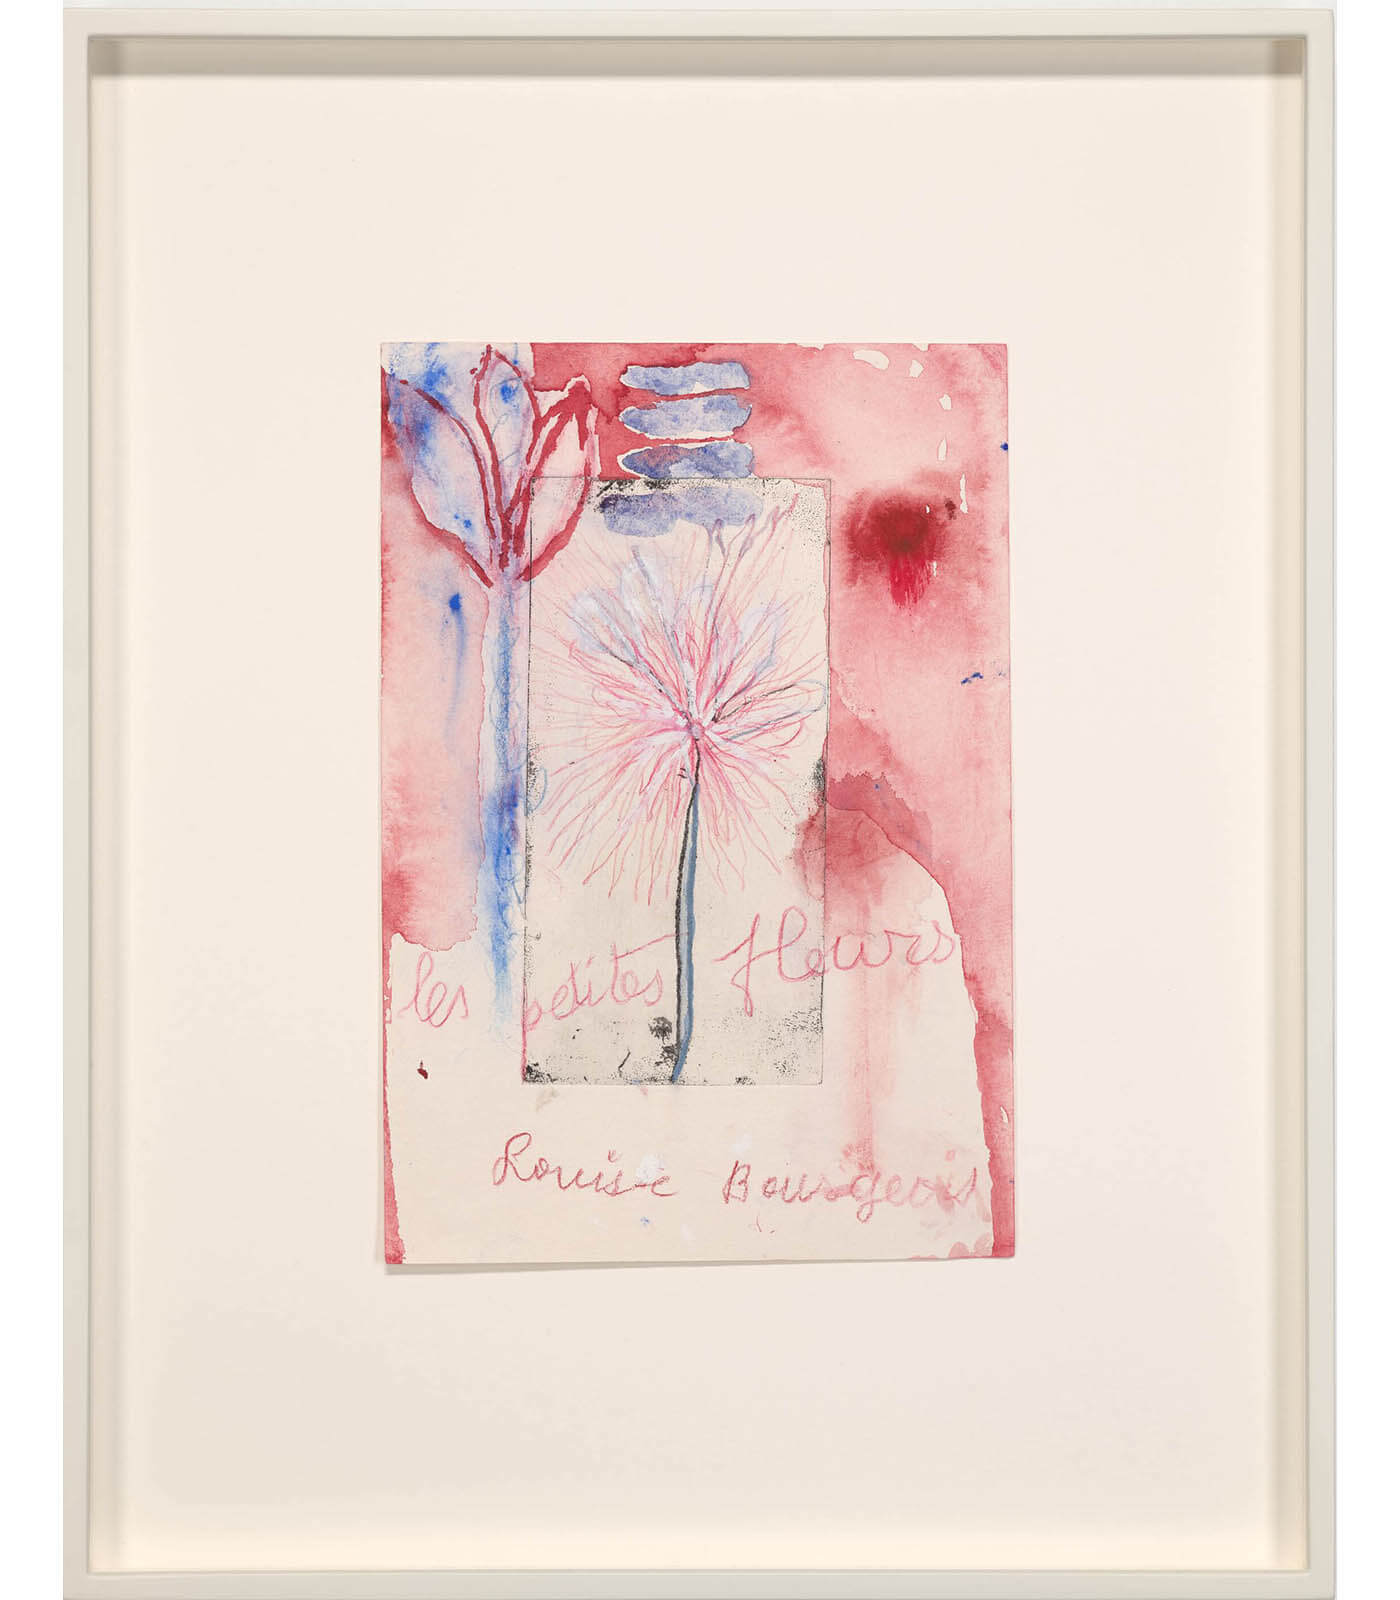 Louise Bourgeois - Drawing Intimacy 1939 – 2010 - Hauser & Wirth